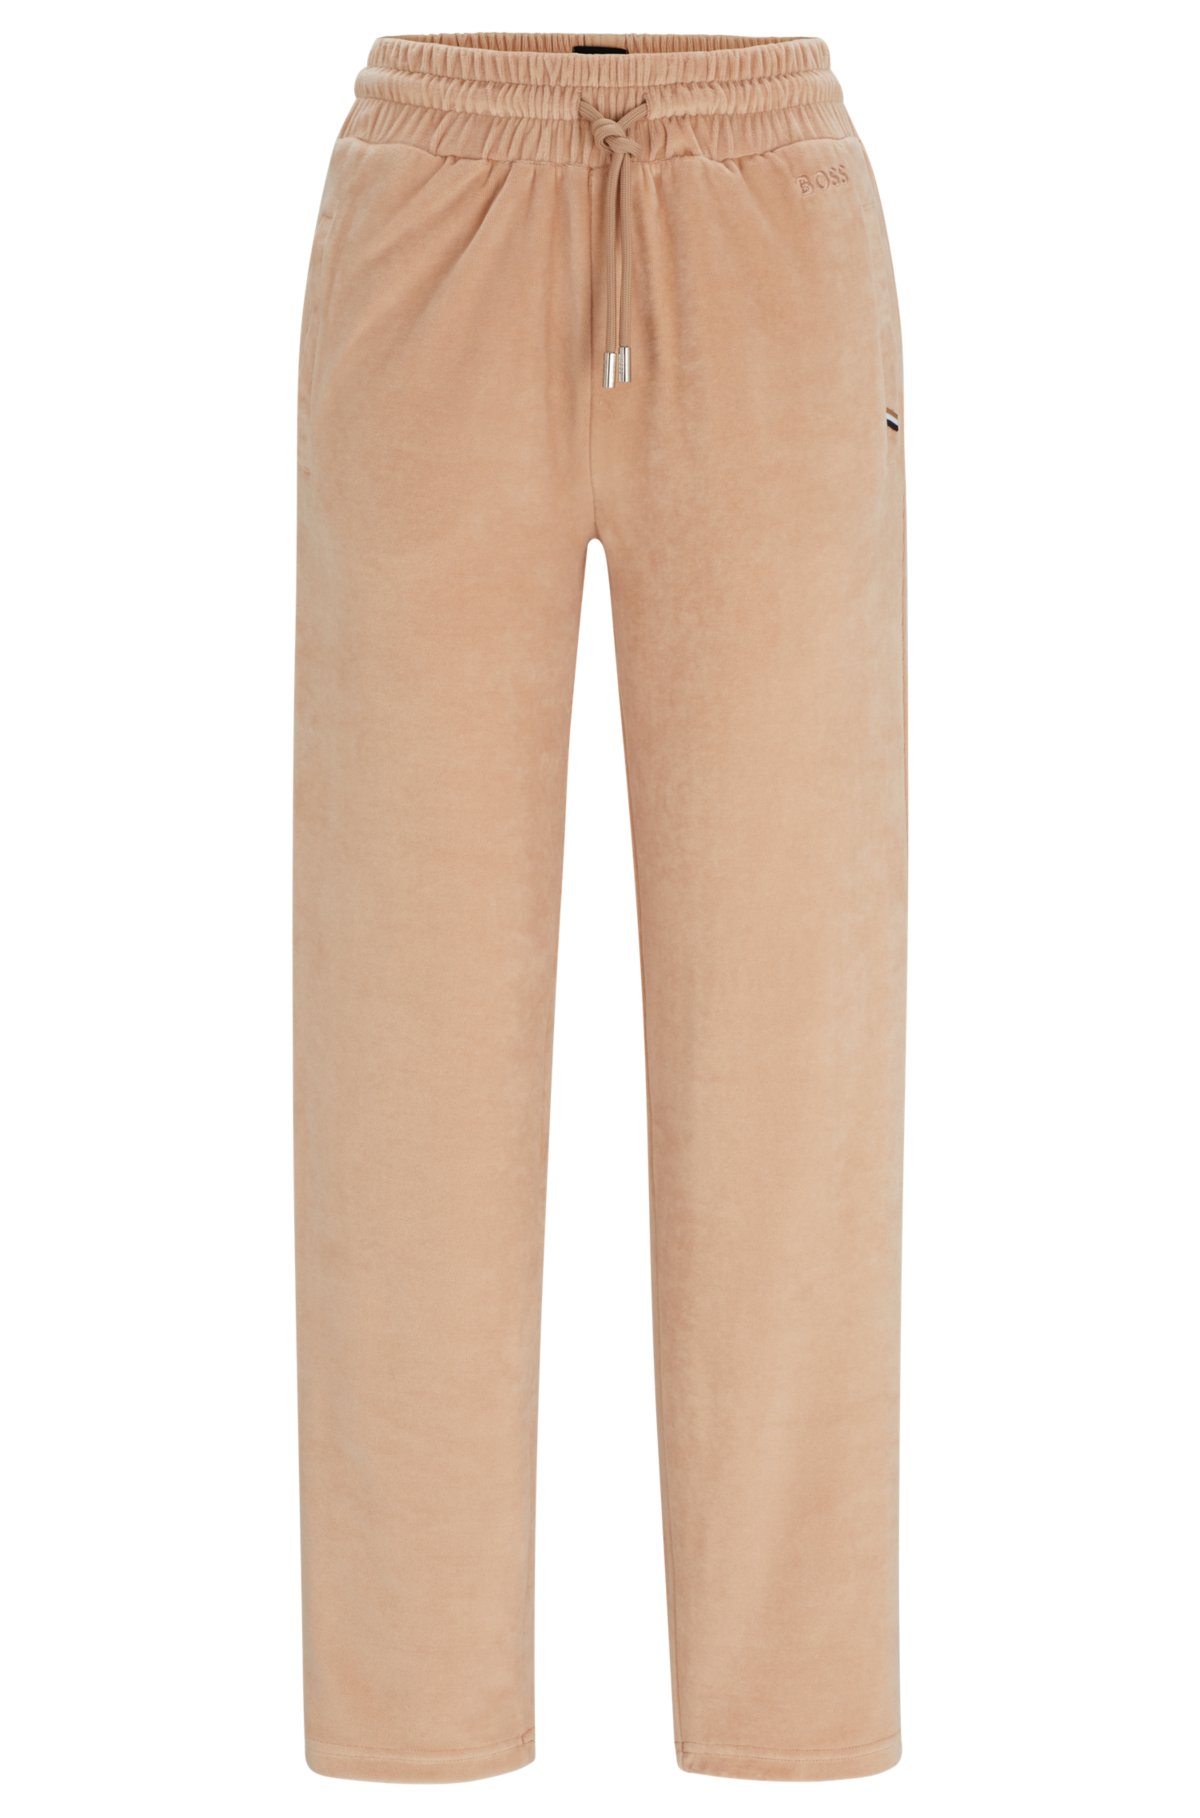 Cotton-blend velour tracksuit bottoms with logo detail, light pink